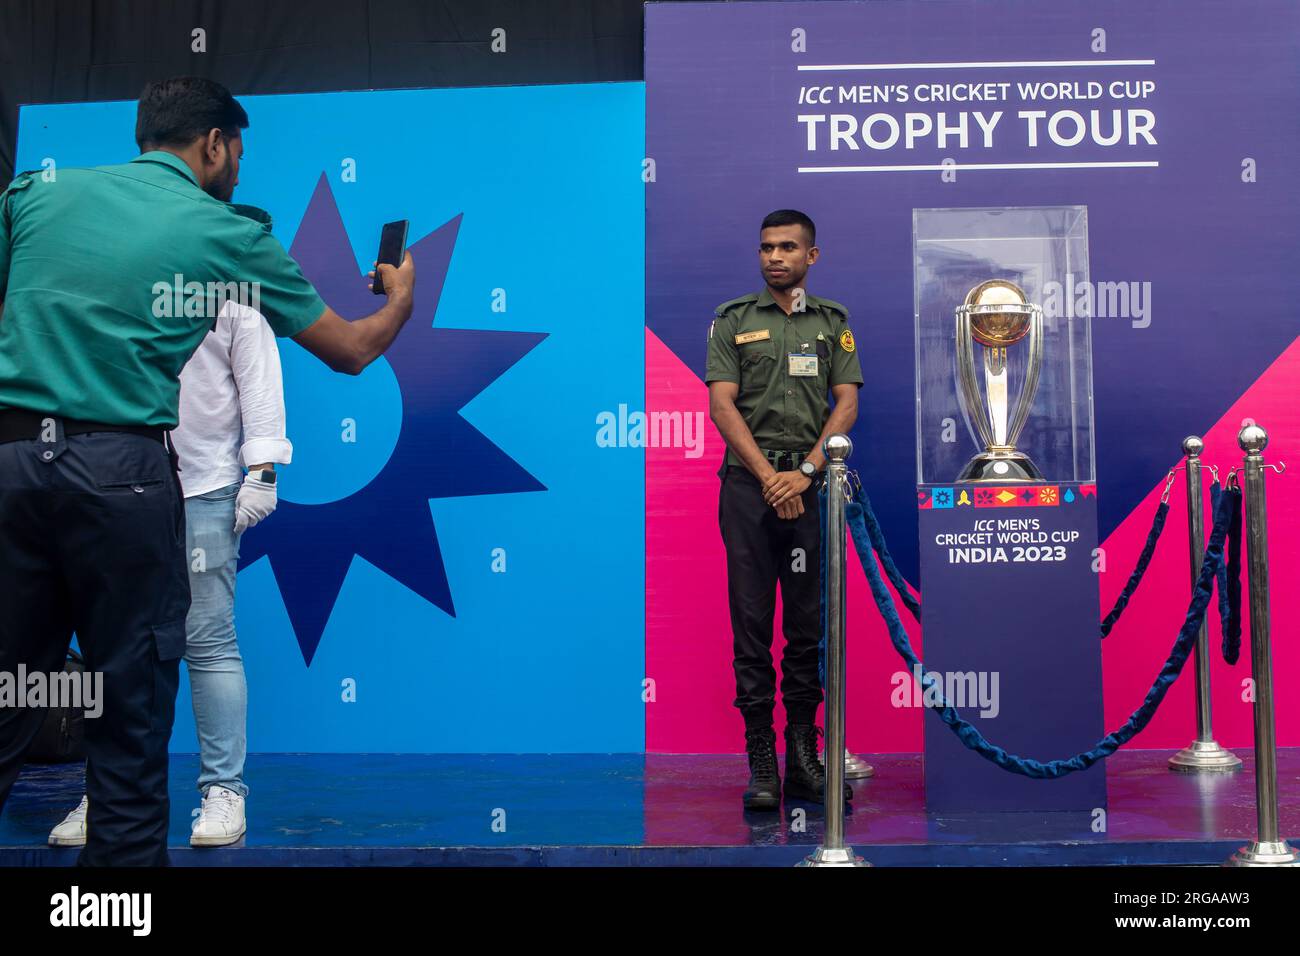 A security guard poses for a photo next to the ICC Men's Cricket World Cup trophy on display at the Sher-e-Bangla National Stadium in Mirpur, Dhaka. ICC Men's Cricket World Cup trophy tour in Bangladesh runs from 07 till 09 August 2023. (Photo by Sazzad Hossain / SOPA Images/Sipa USA) Stock Photo